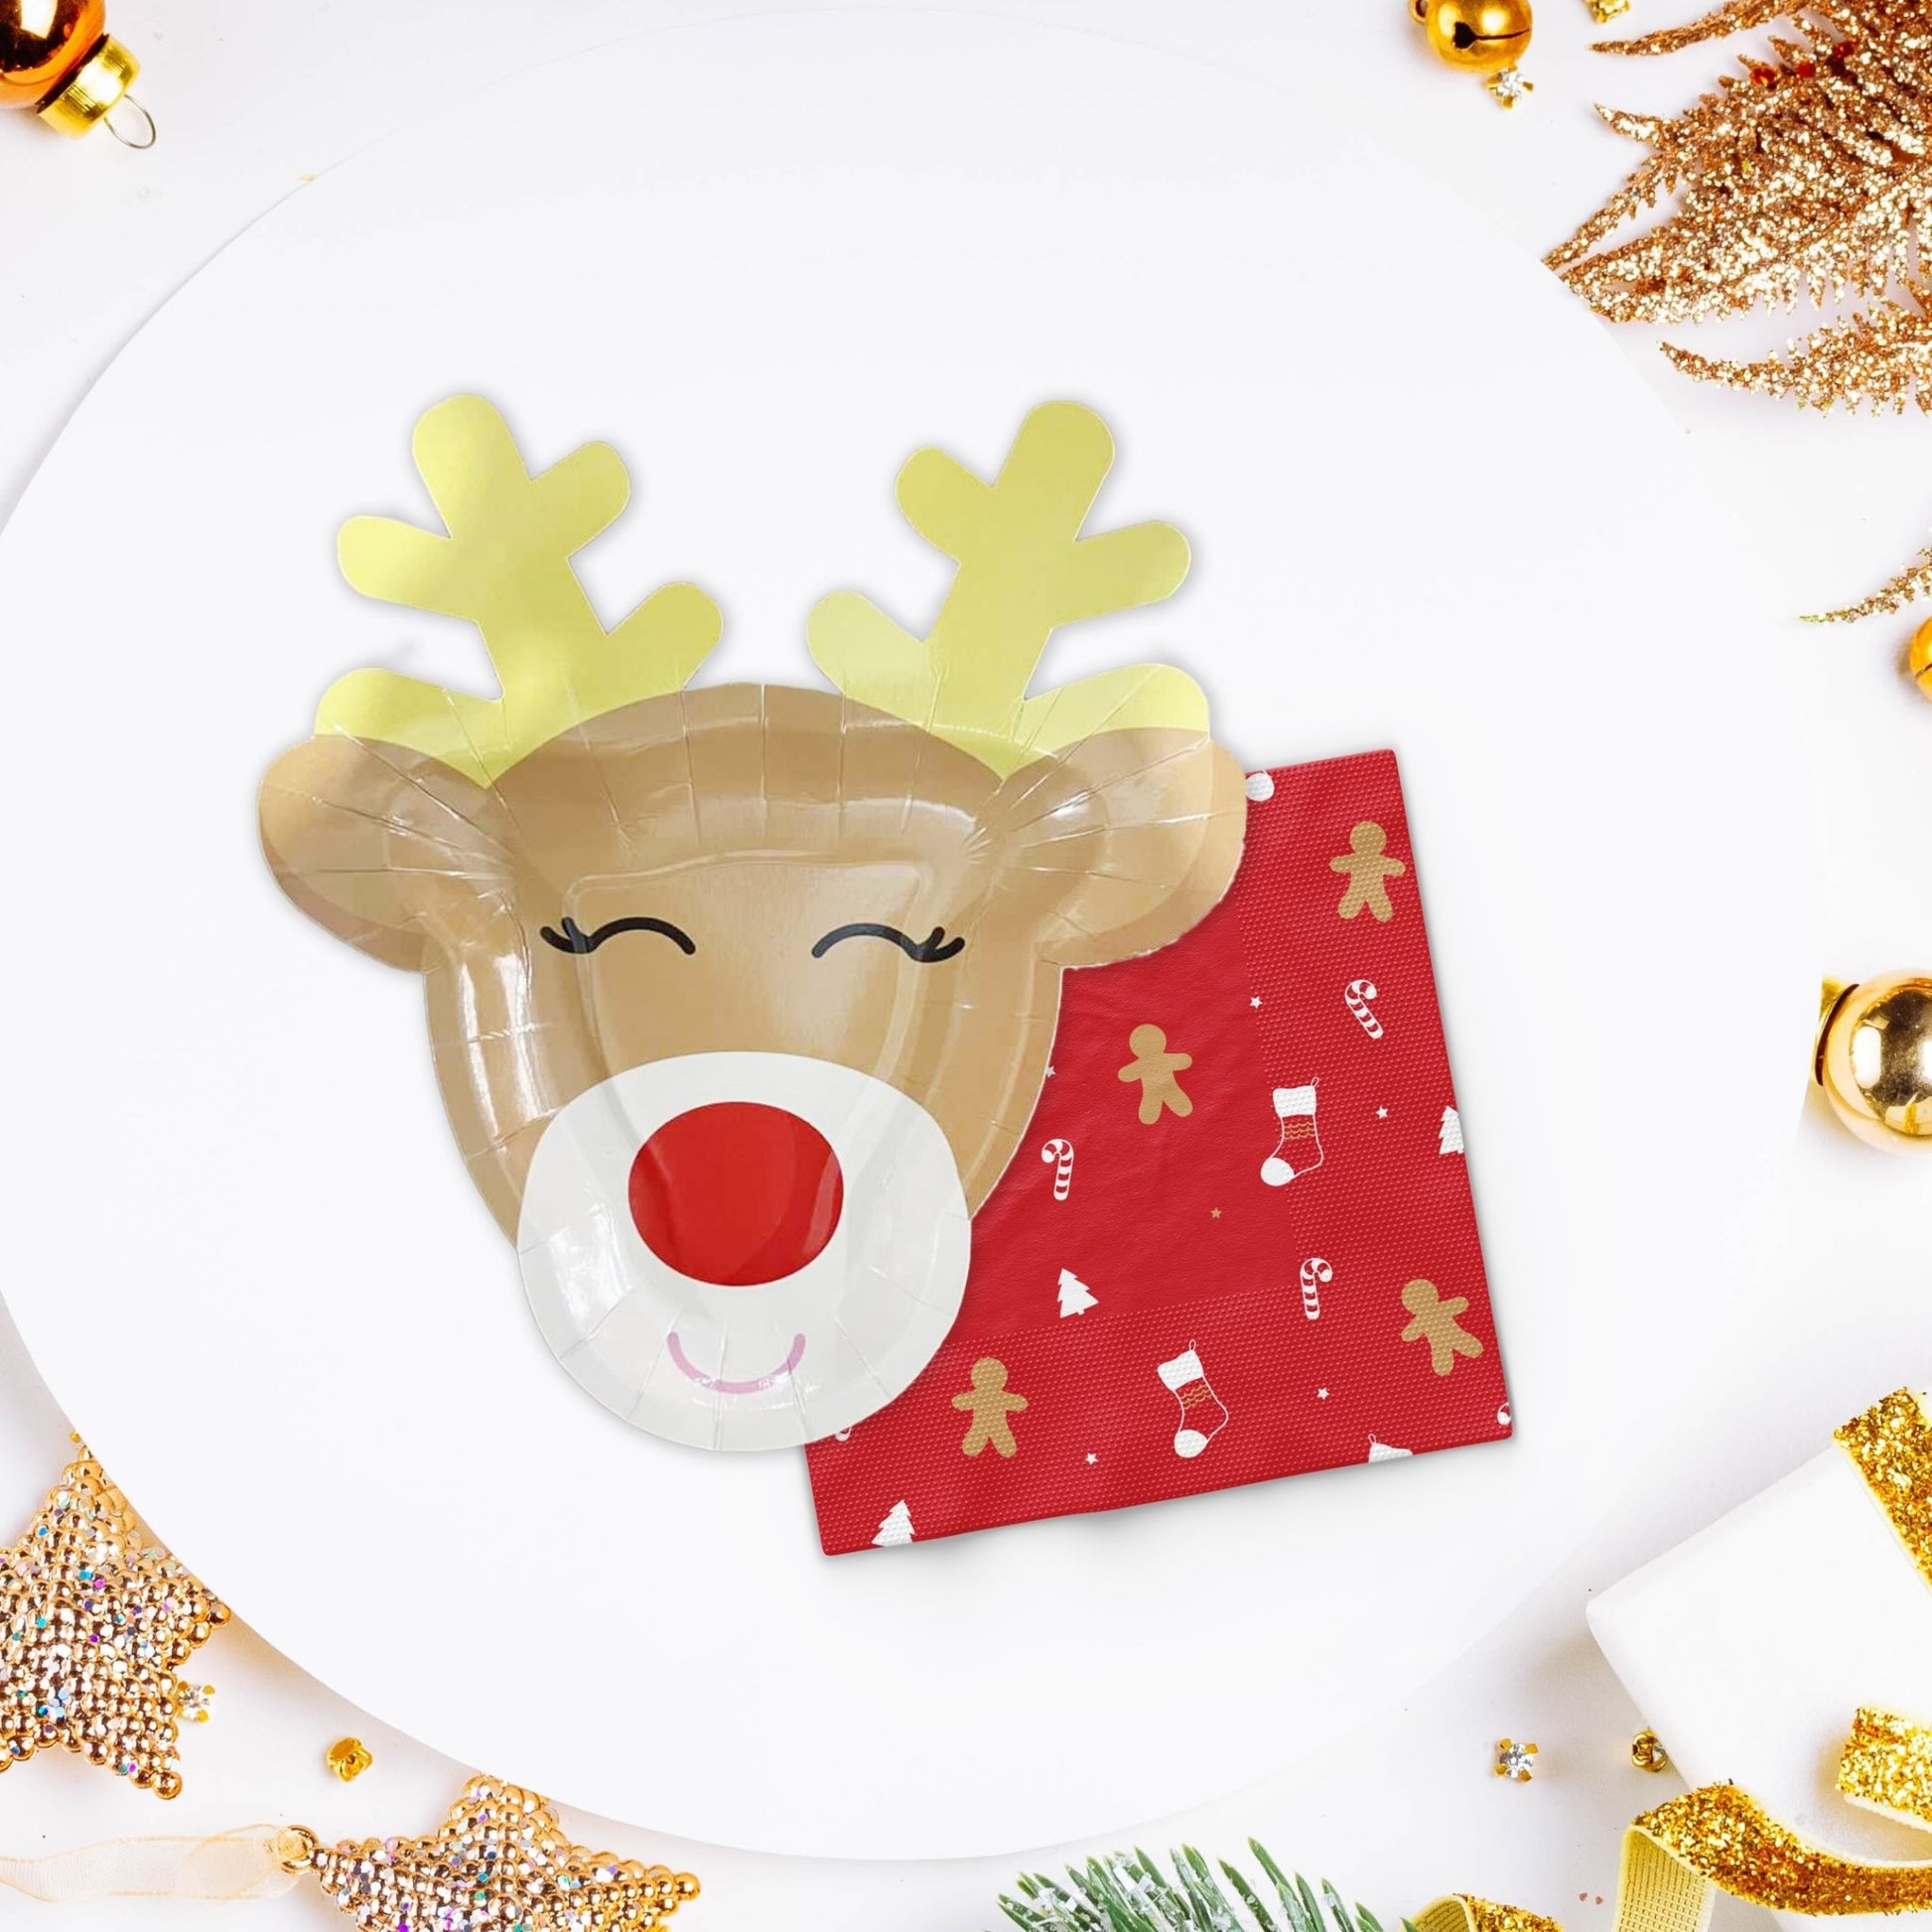 Rudolph the Reindeer Christmas Paper Plates (Set of 8) - Ellie's Party Supply